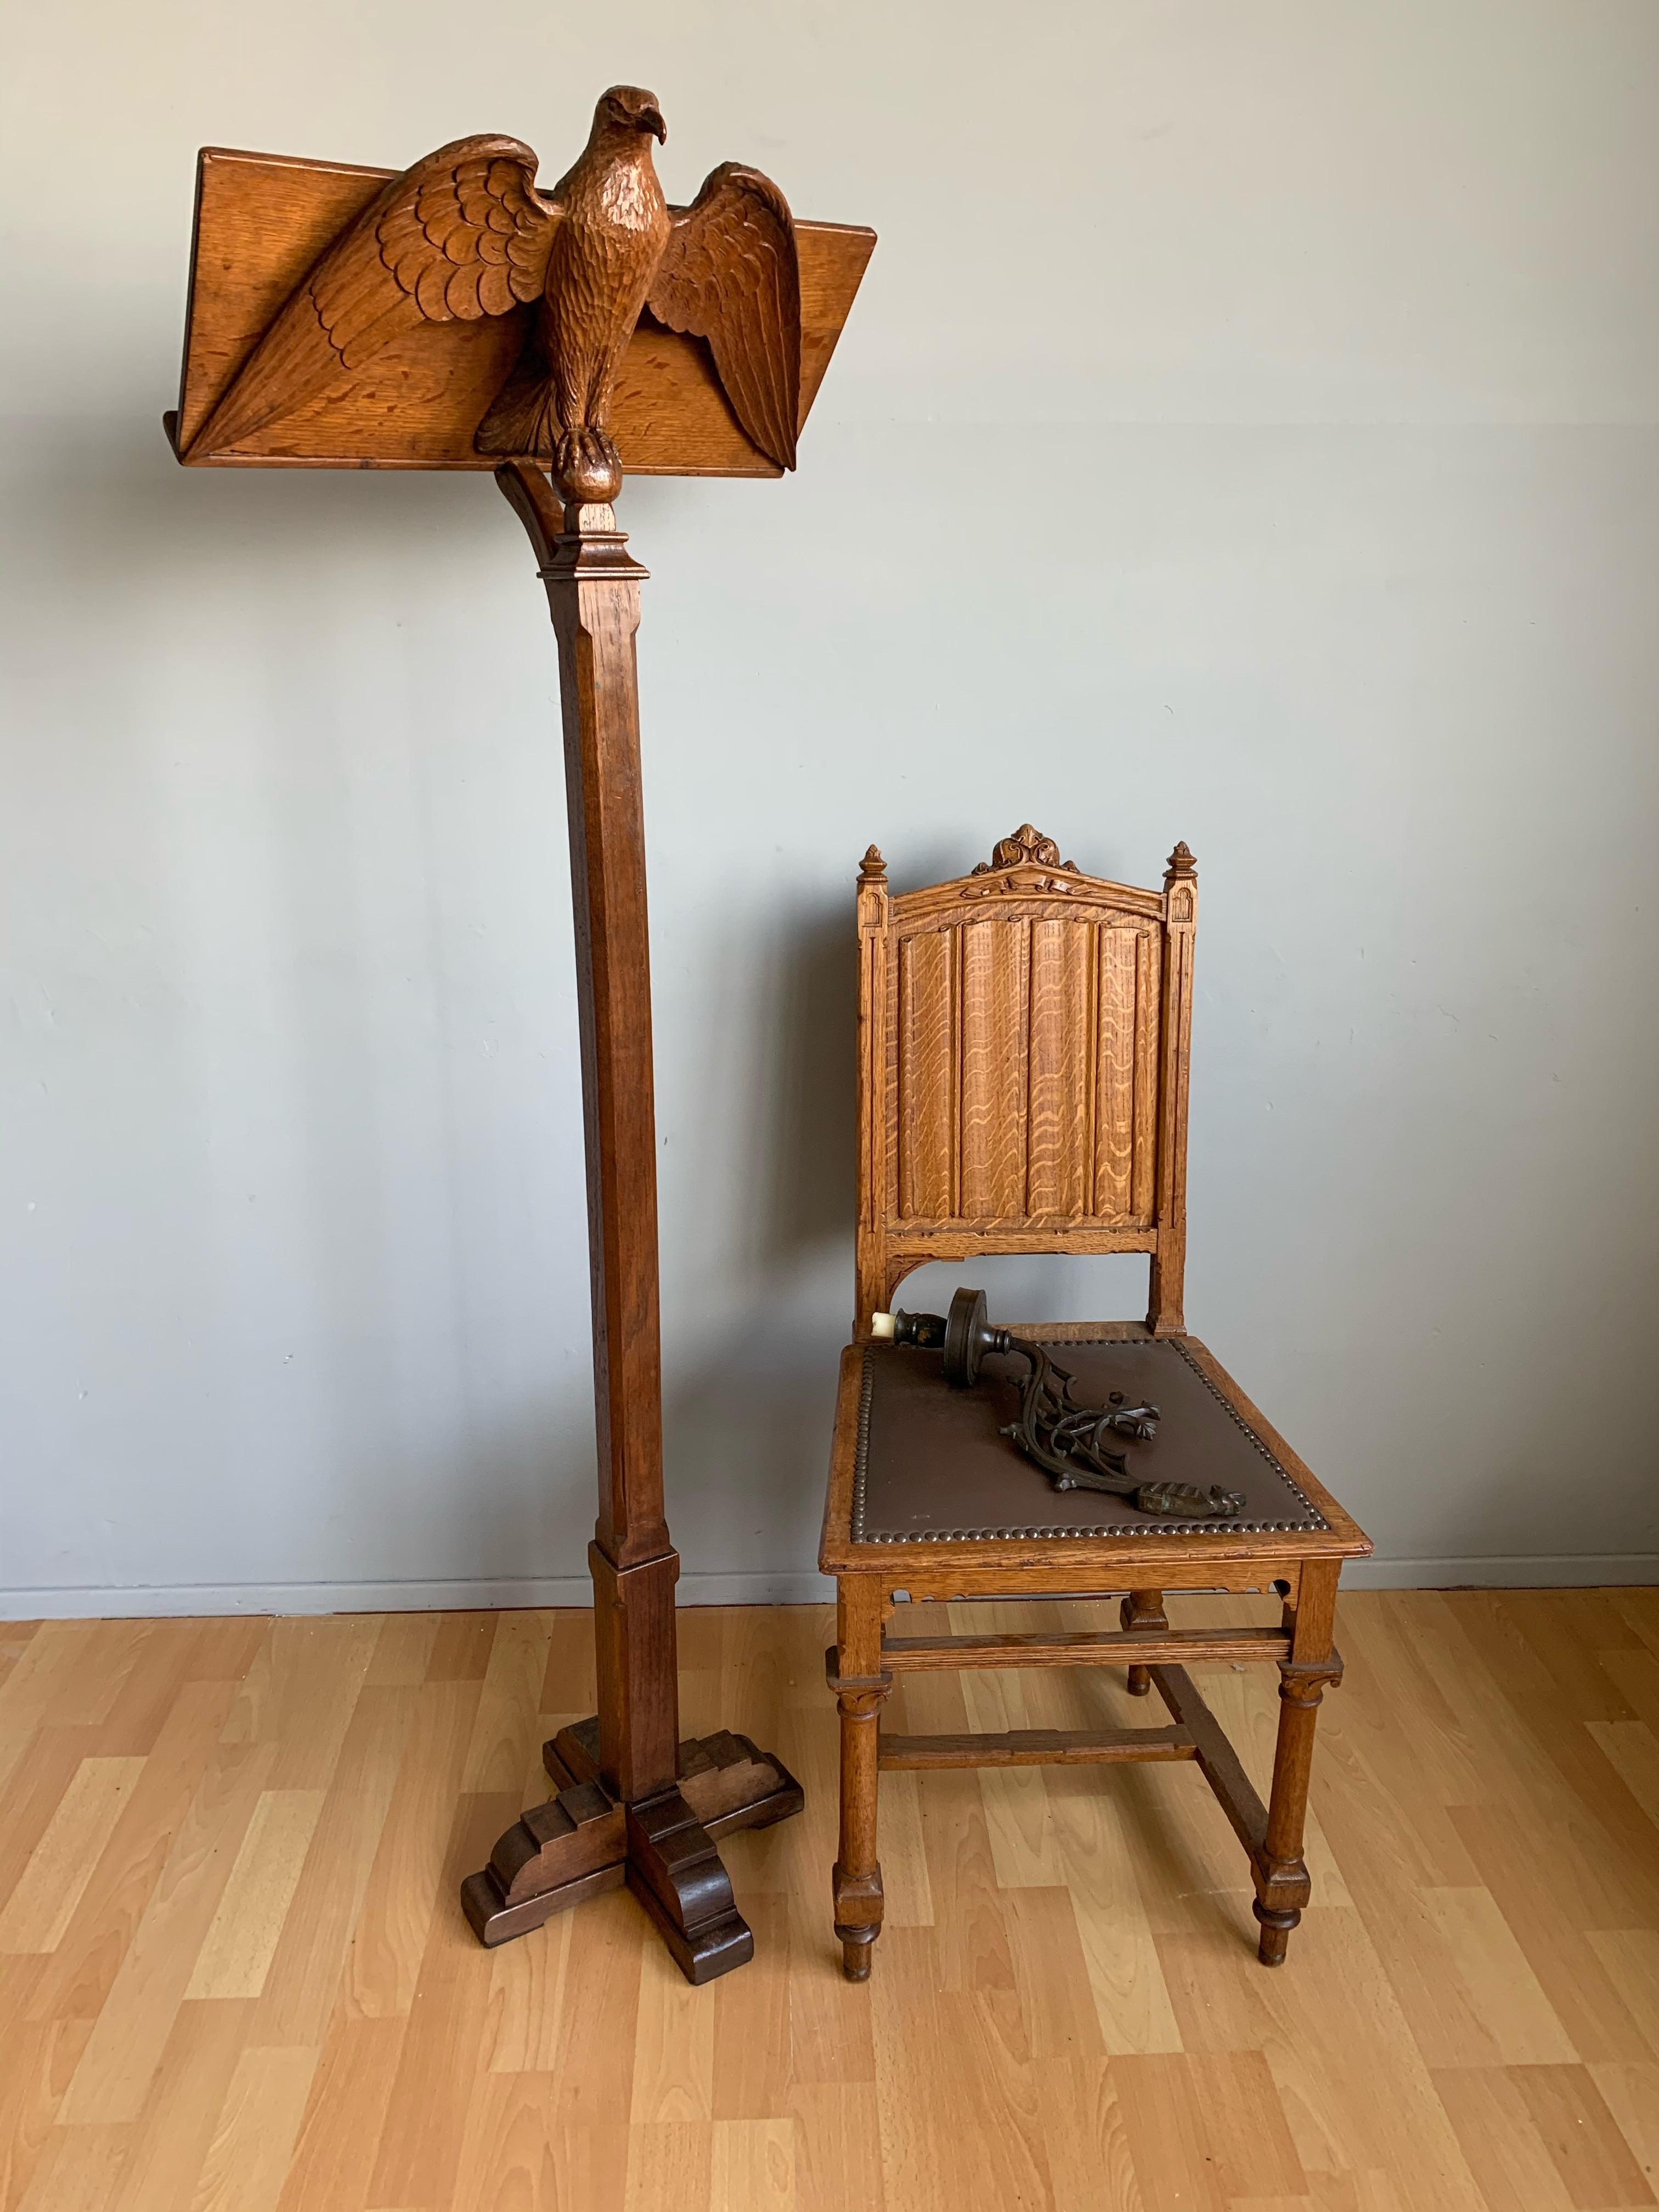 Stylish and meaningful, Christian church relic referring to Saint John. 

For the collectors of rare and stylish church antiques we are also offering this remarkable bible stand. Even if you would not use this rare antique as a book or bible stand